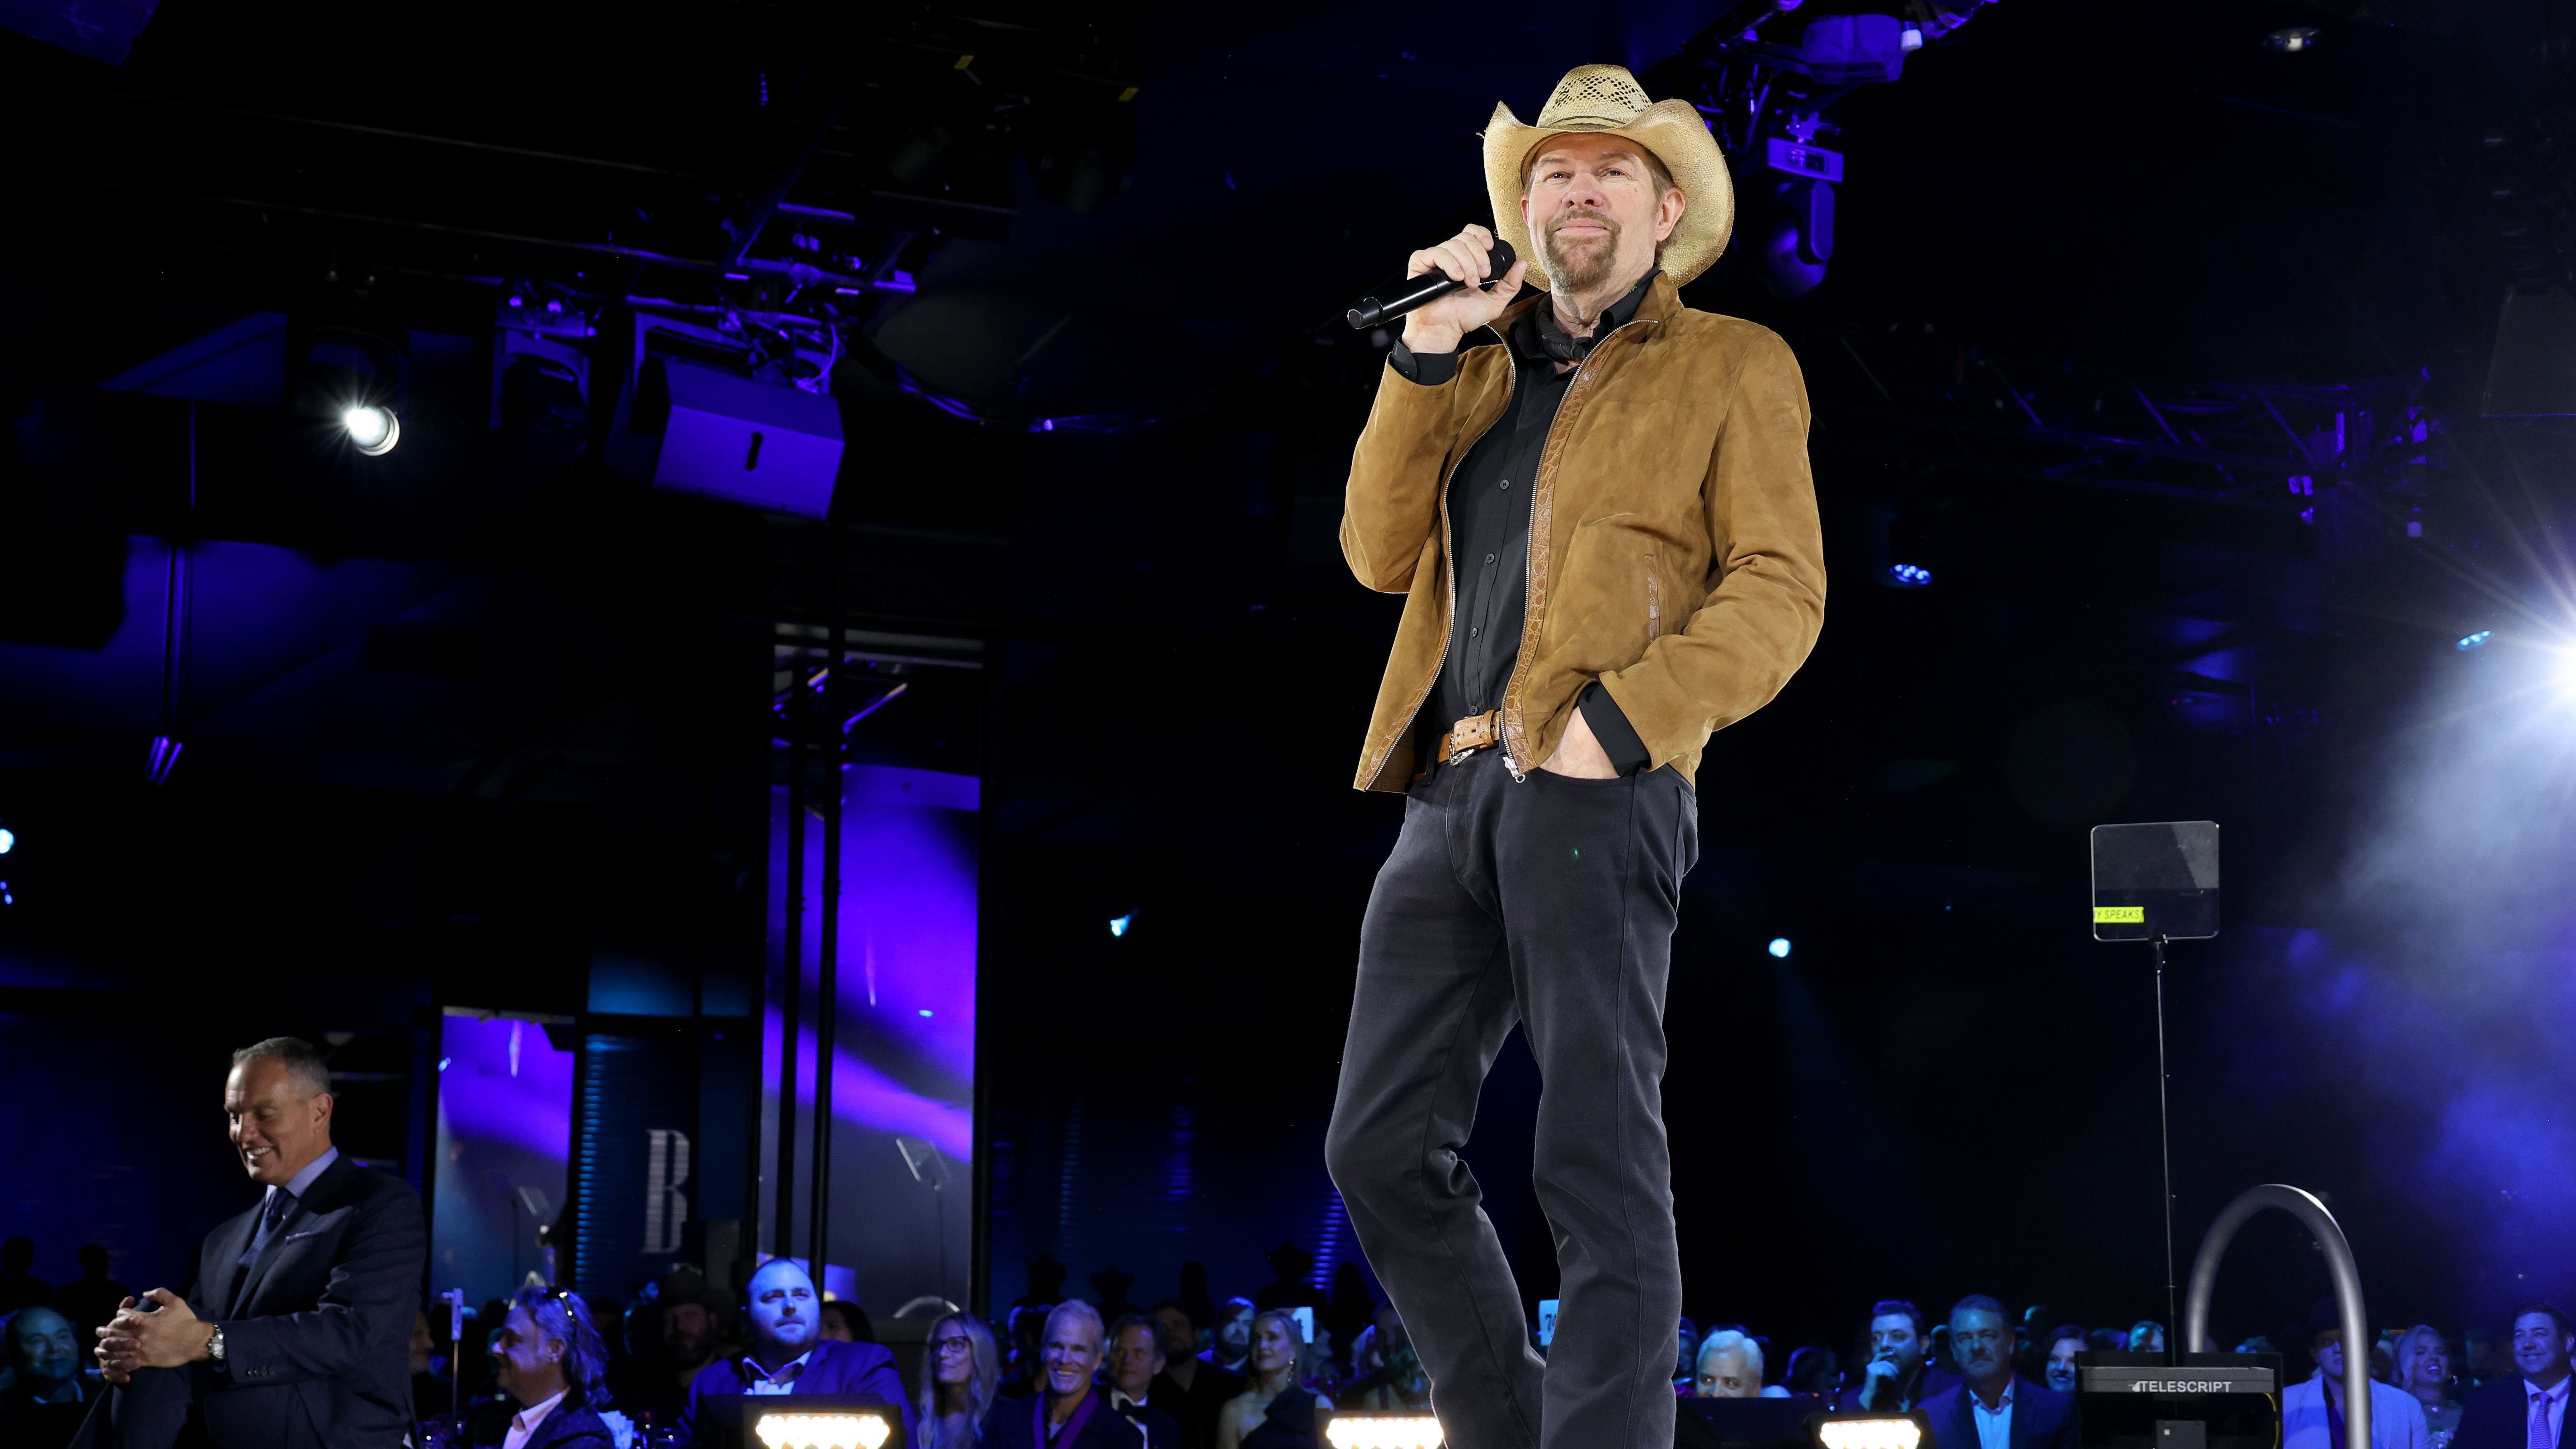 Toby Keith battling stomach cancer